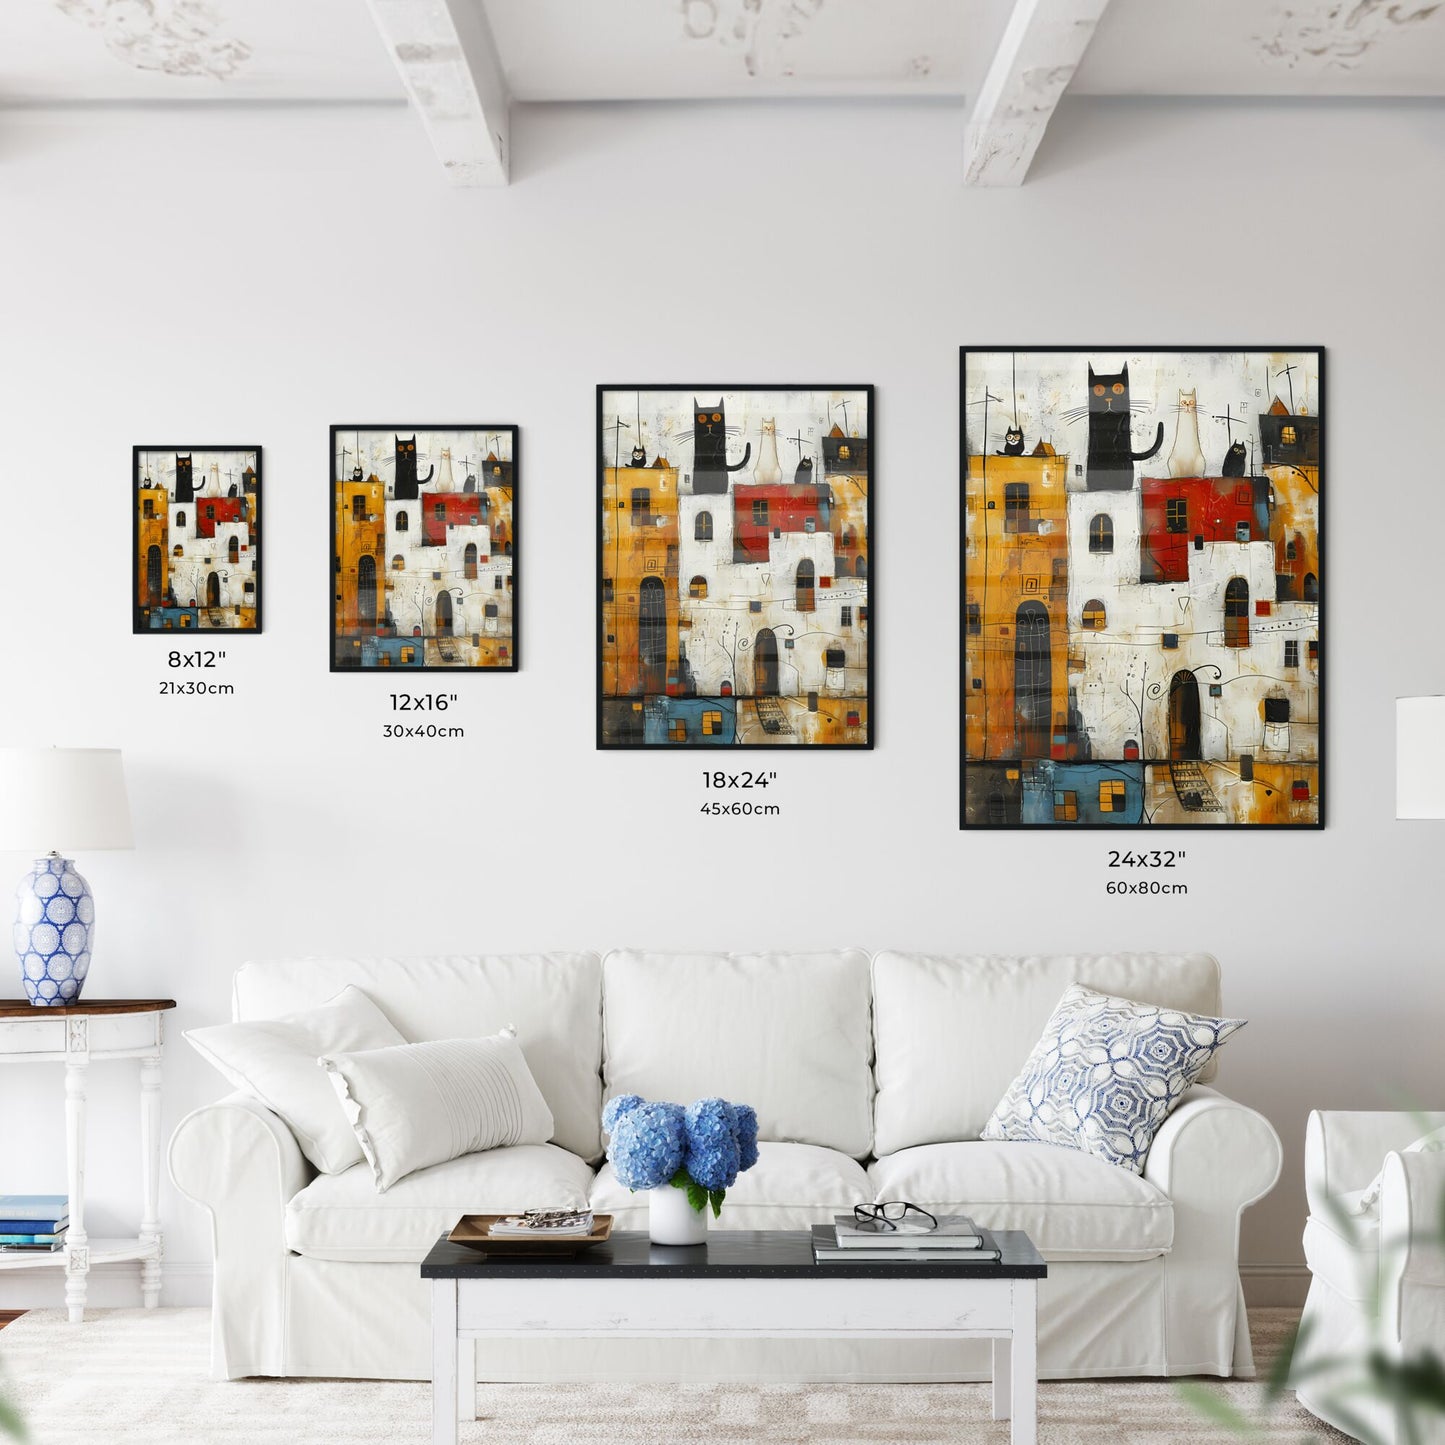 A Poster of cats eclectic squares on a white background - A Painting Of A City With Cats On It Default Title